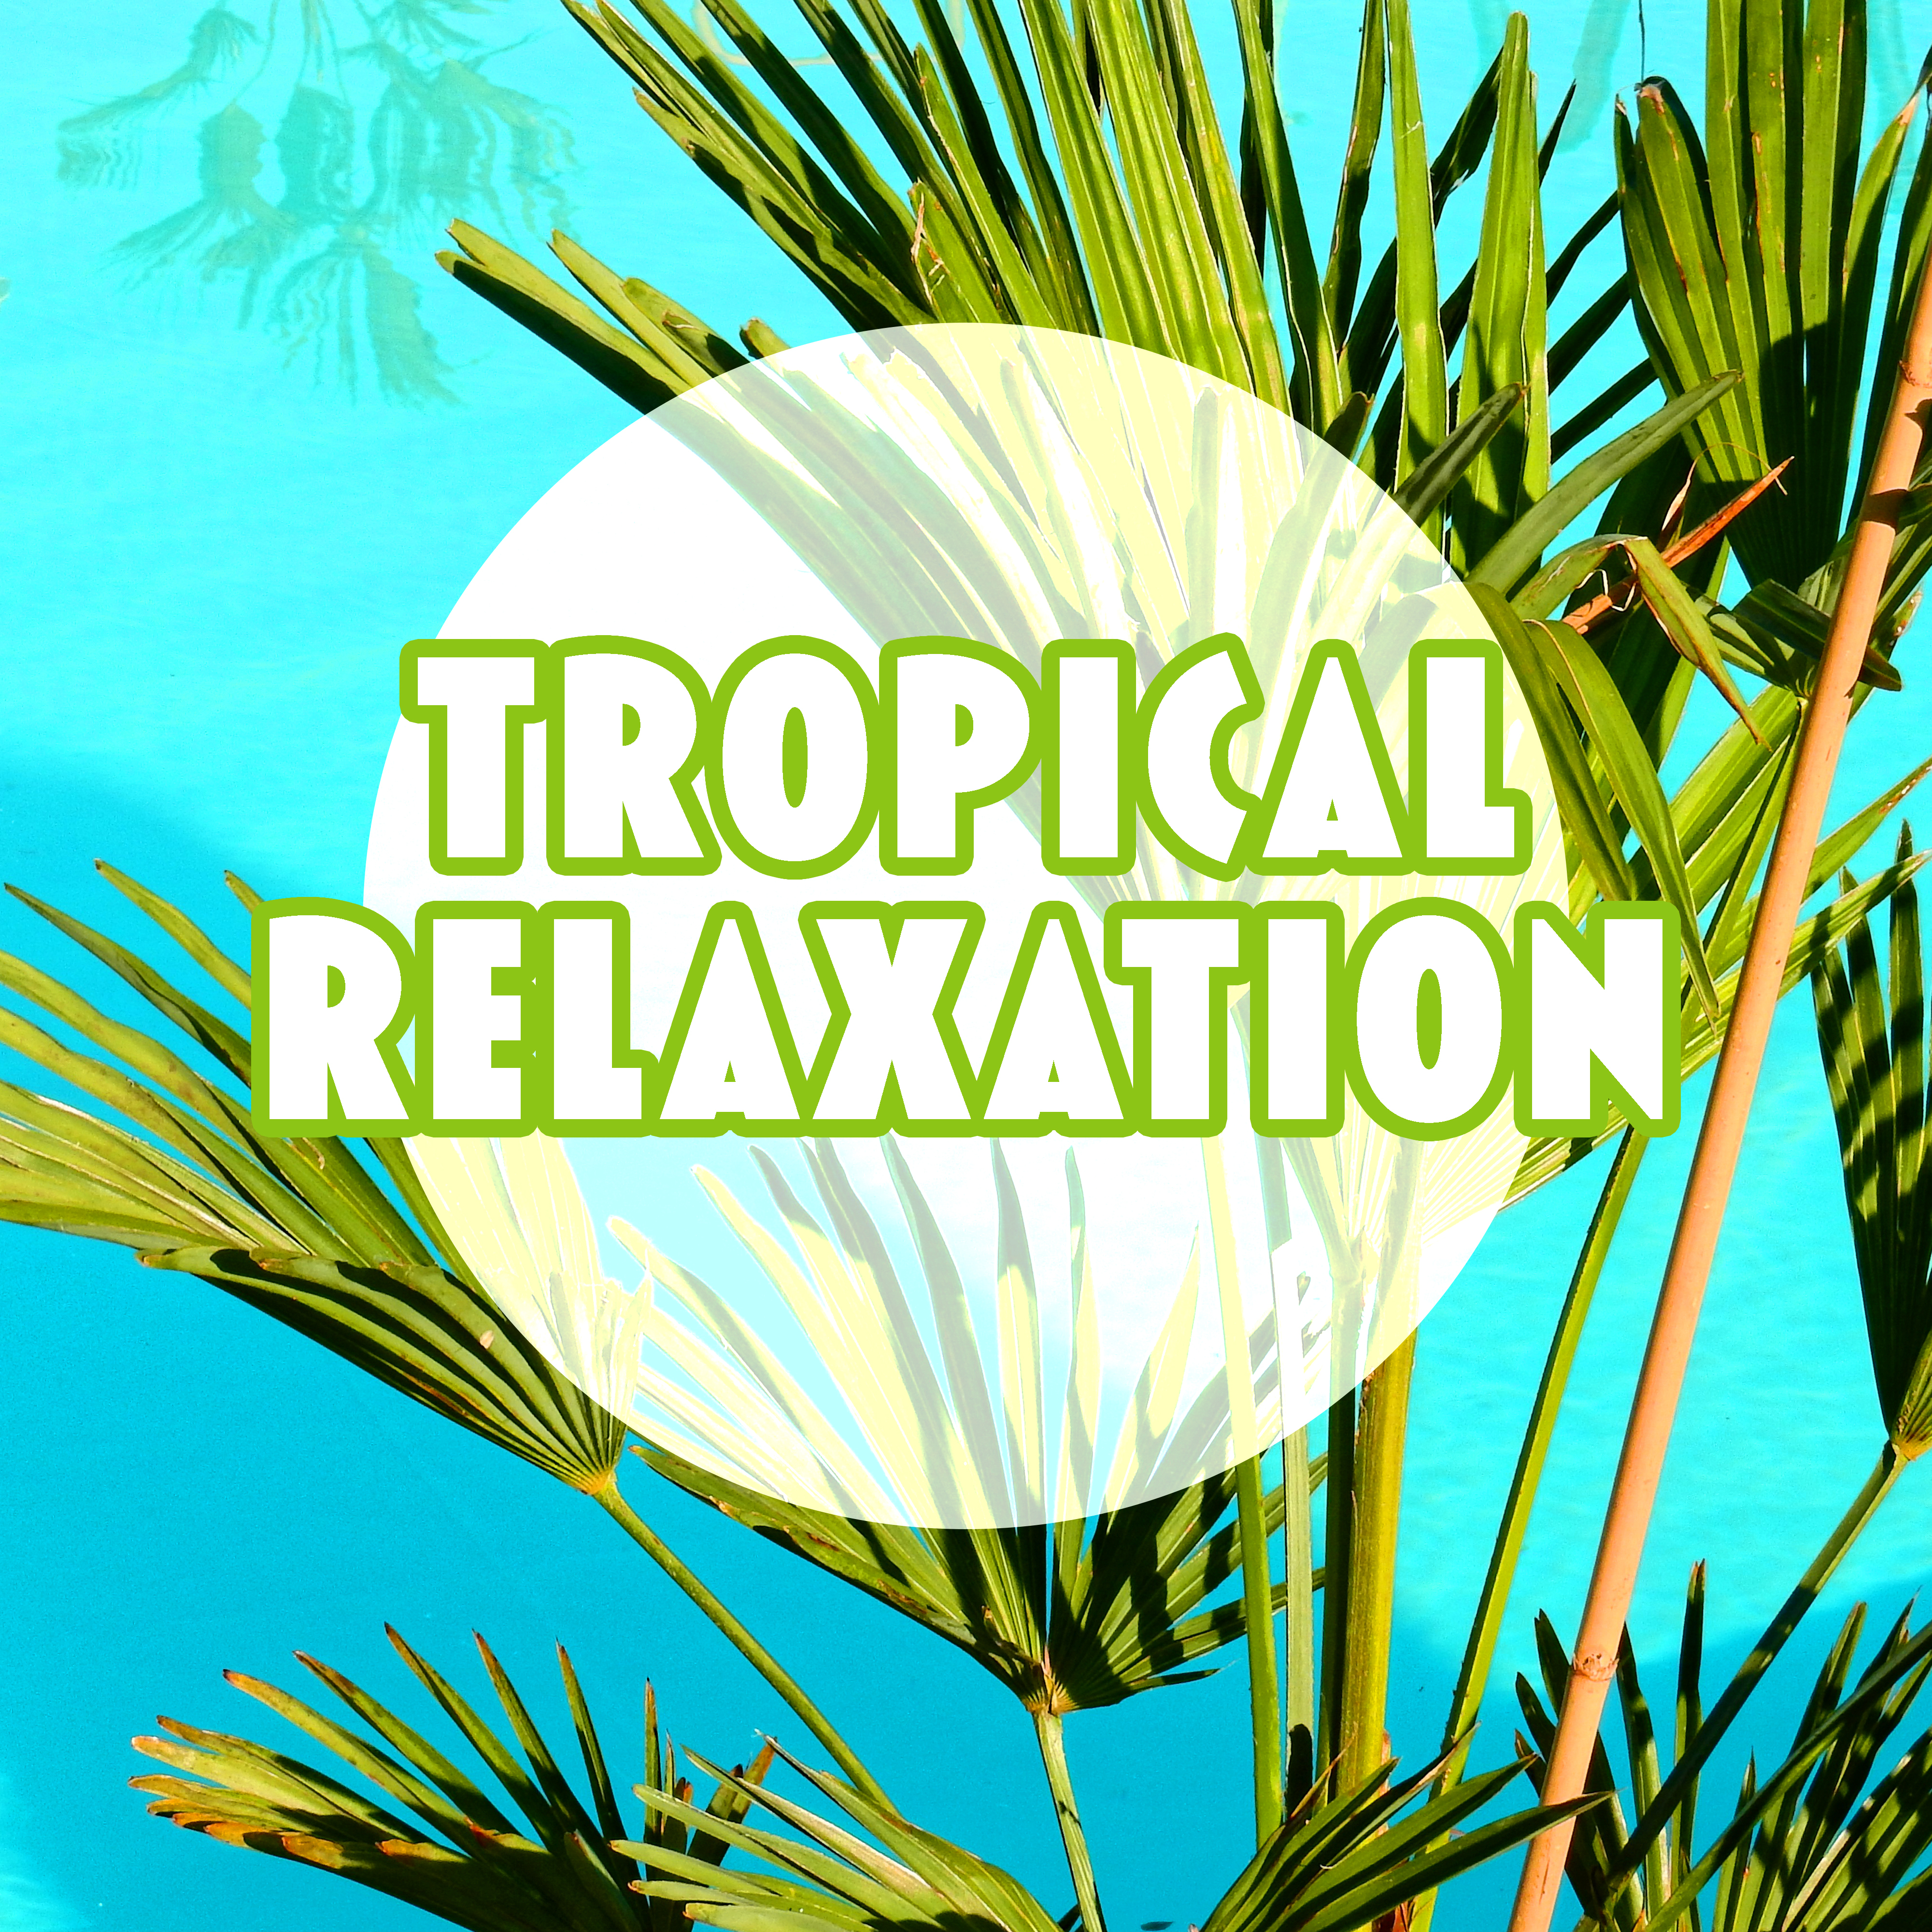 Tropical Relaxation – Chill Out to Rest, Tropical Island, Sounds to Relax, Chill Out Music 2017